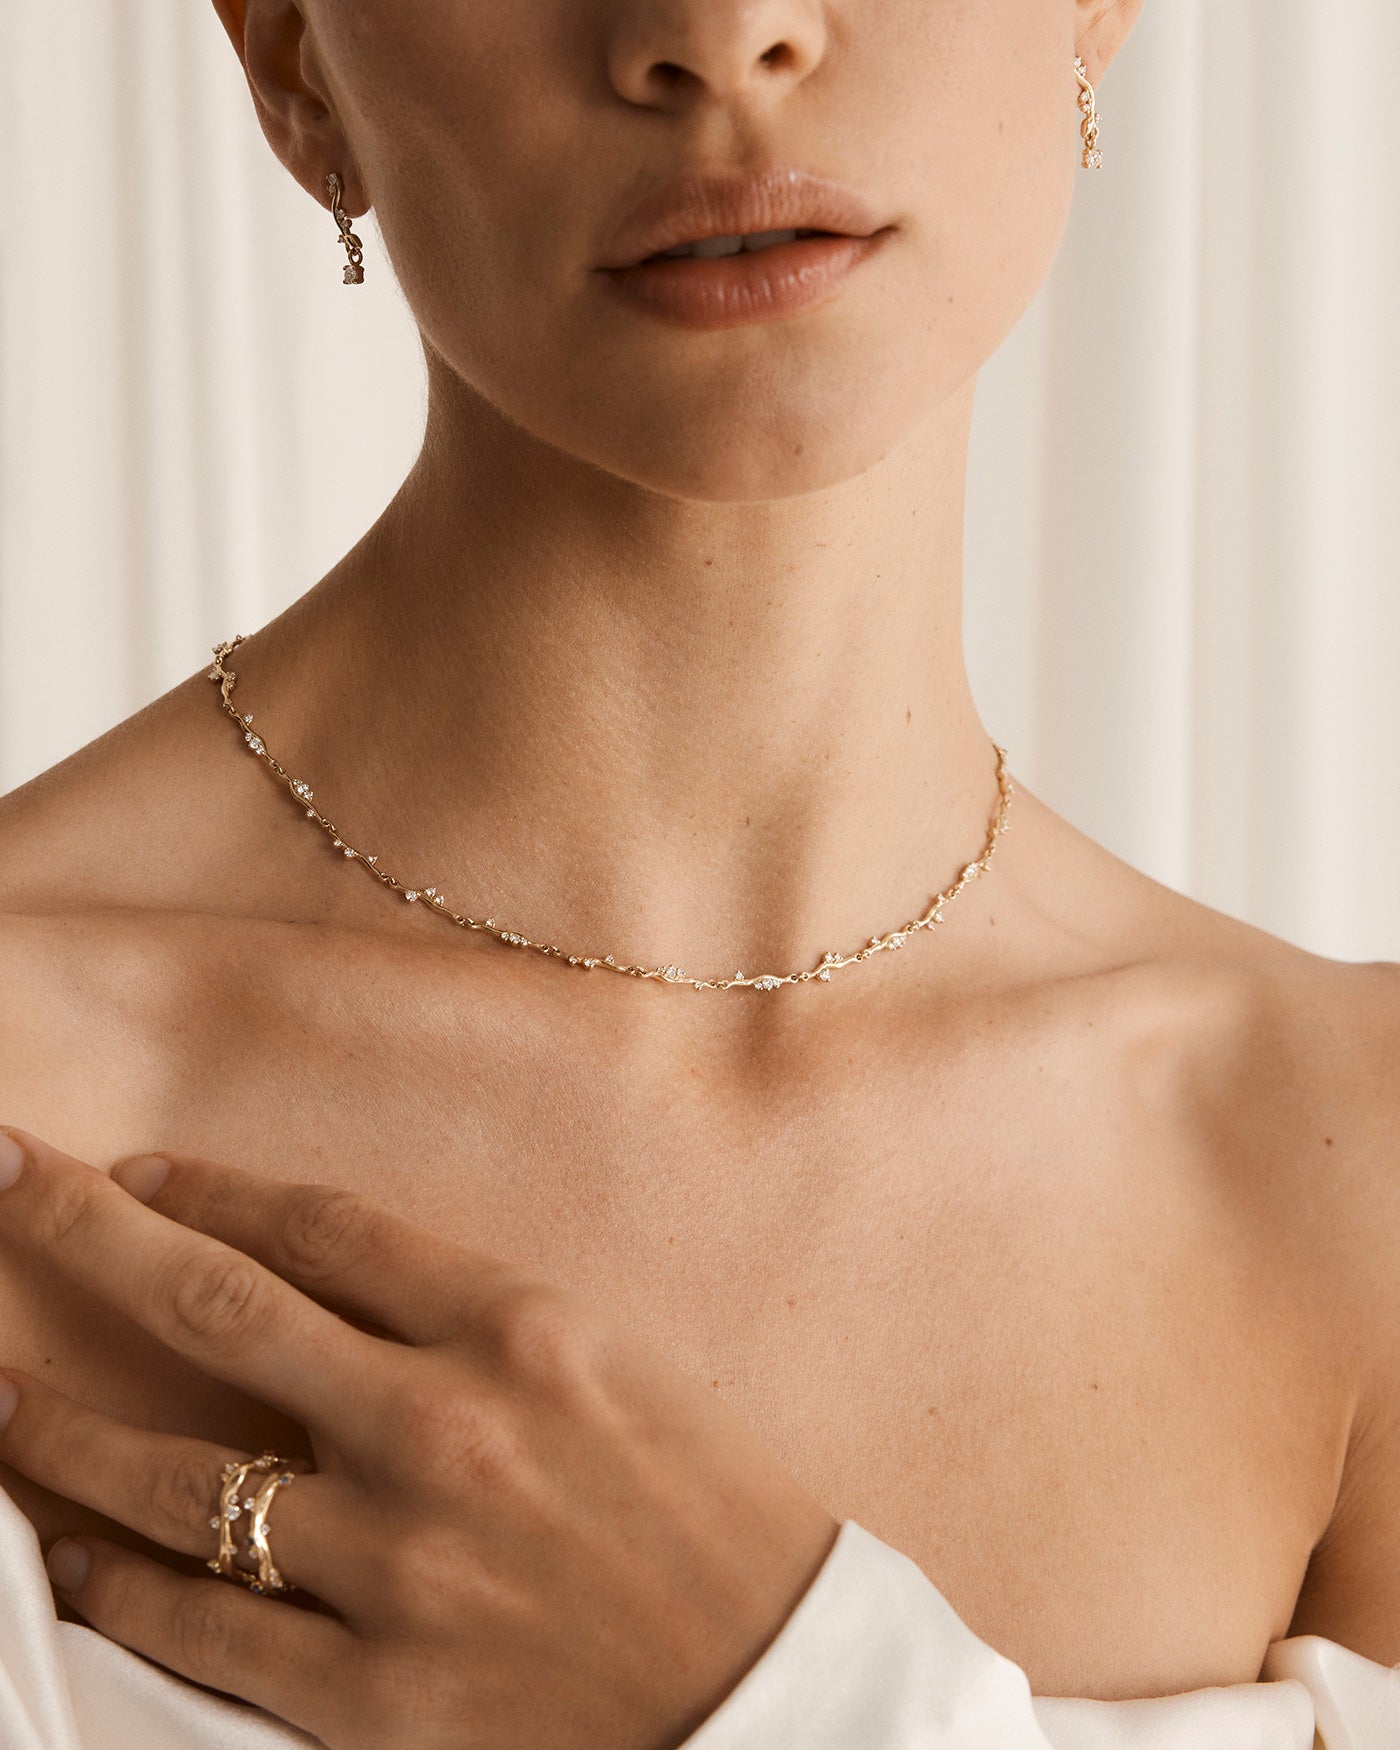 Photo of Ember Necklace on model, wearing a white dress and matching diamond earrings